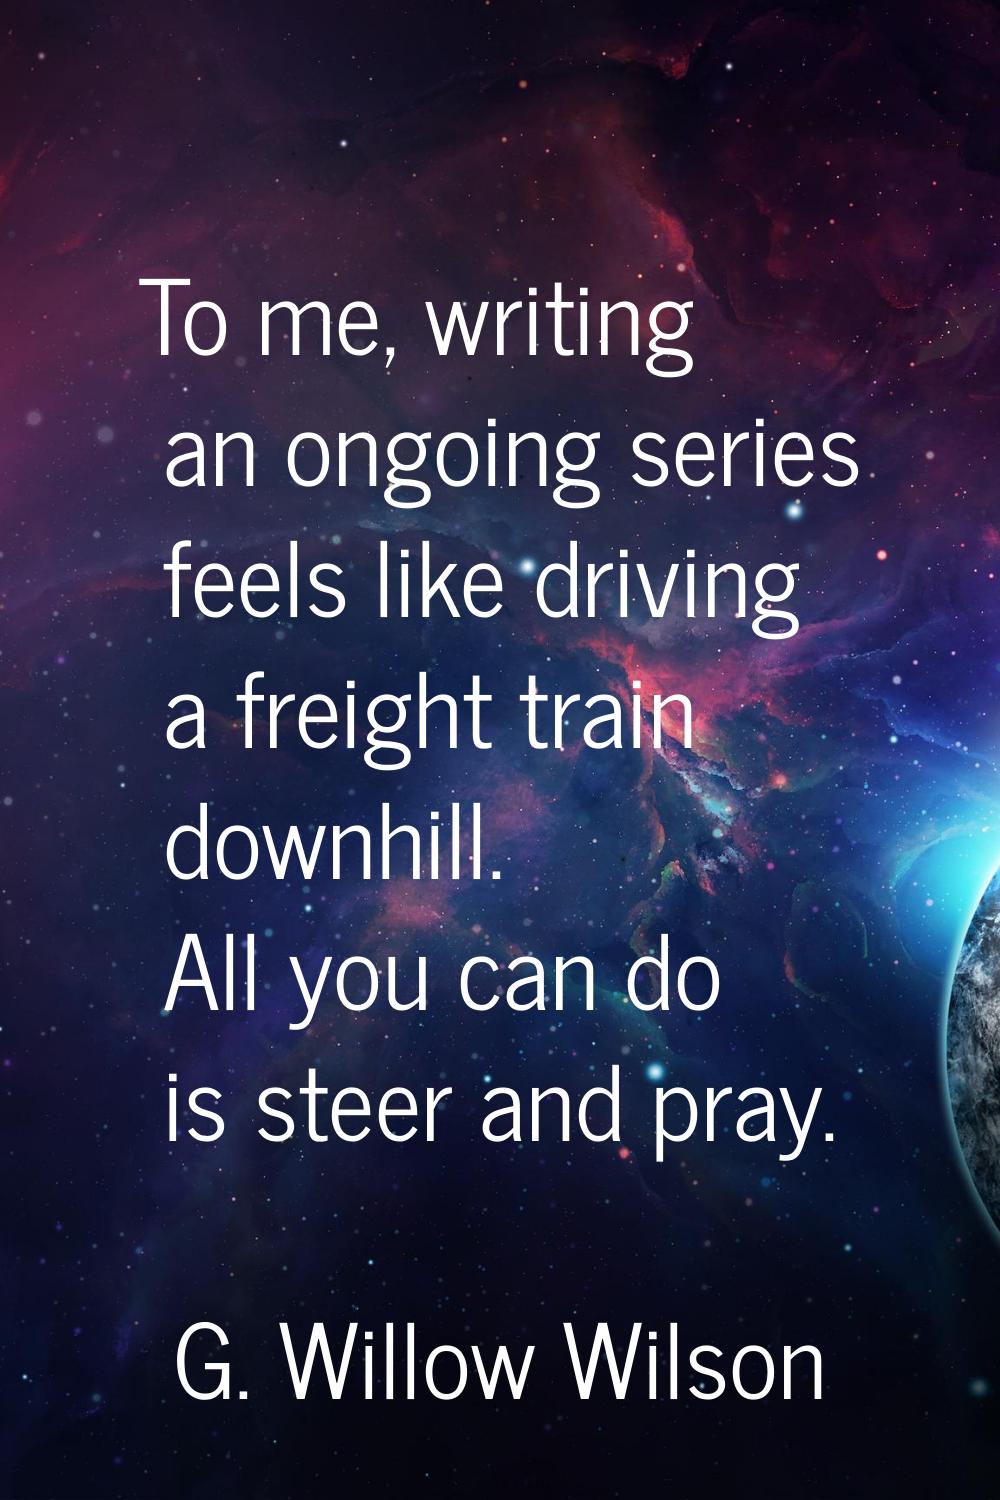 To me, writing an ongoing series feels like driving a freight train downhill. All you can do is ste